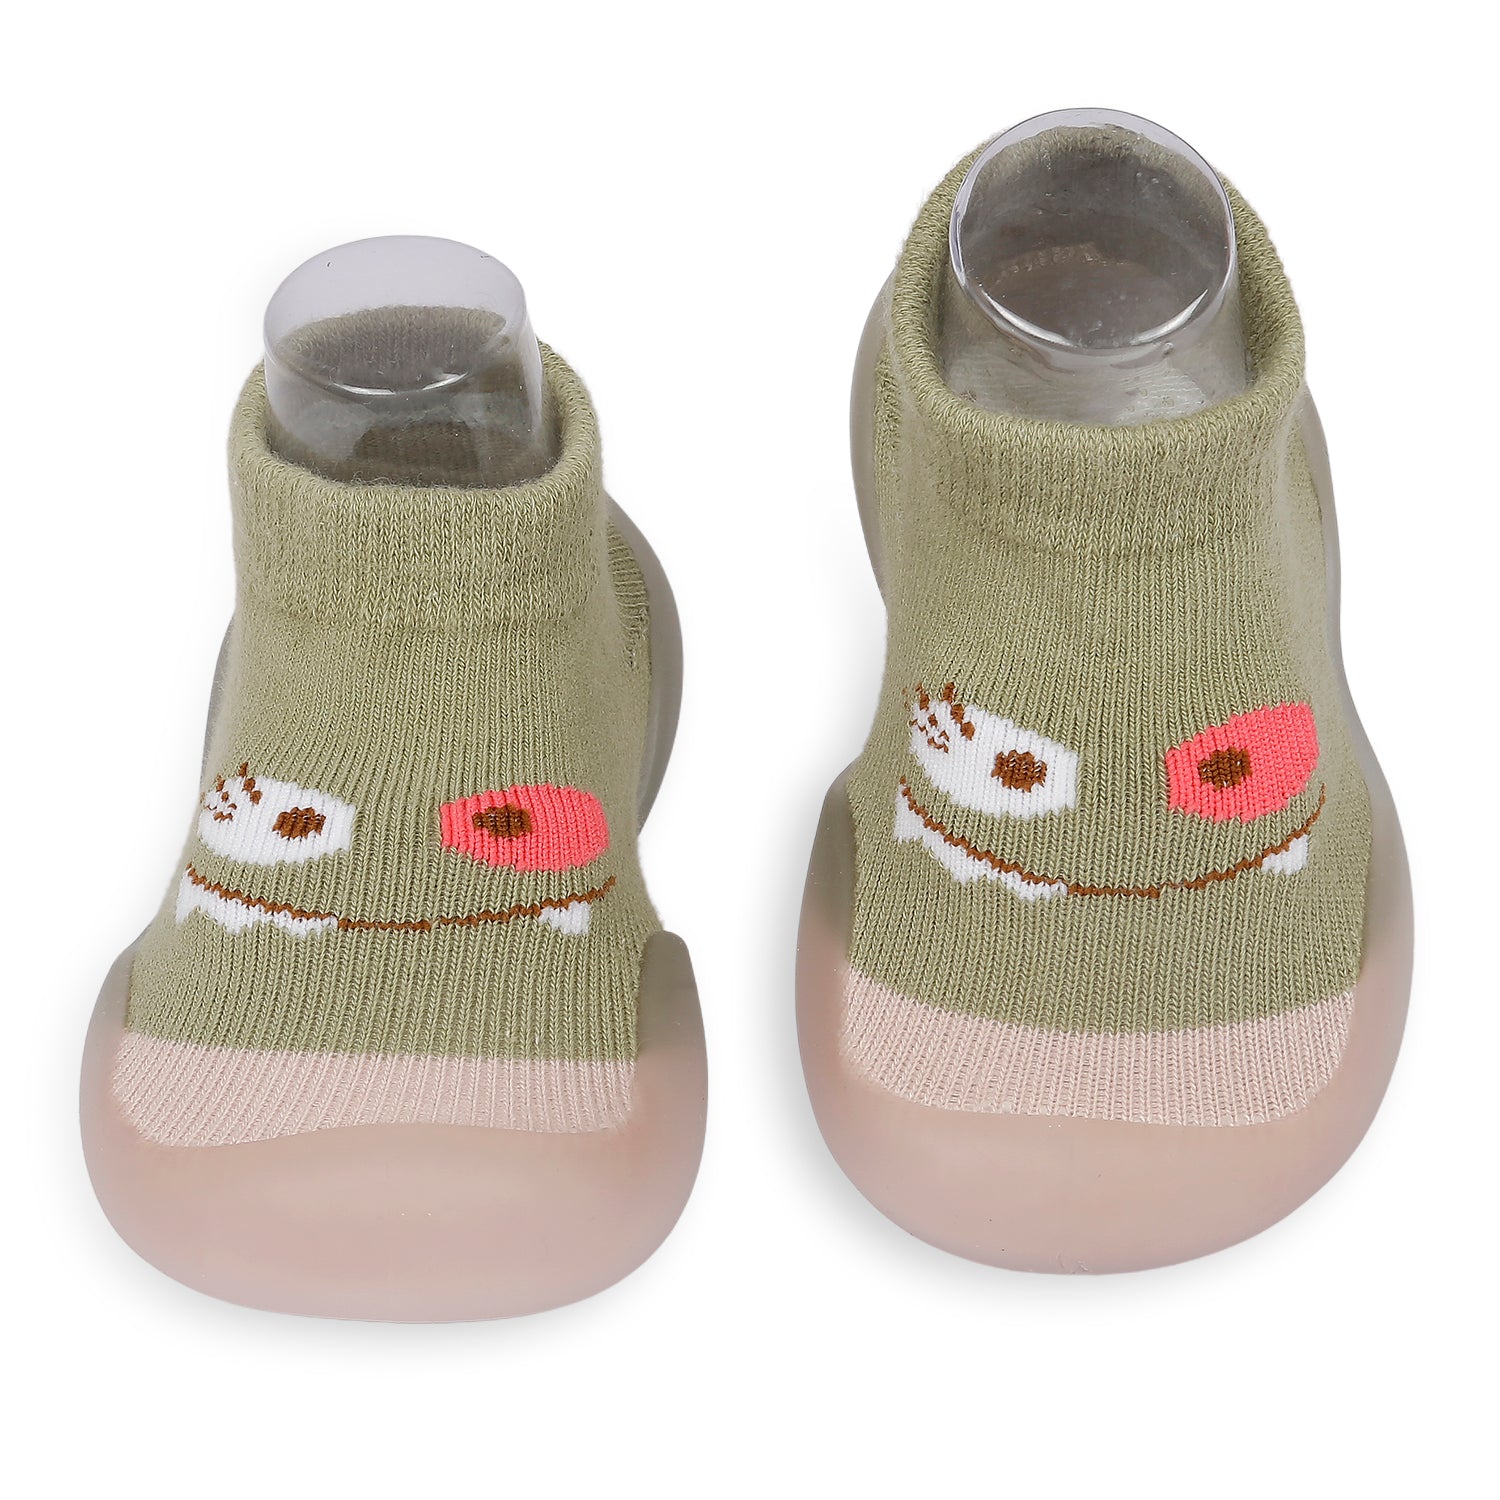 Cute Eye Anti-Skid Slip-On Rubber Sole Shoes - Olive Green - Baby Moo